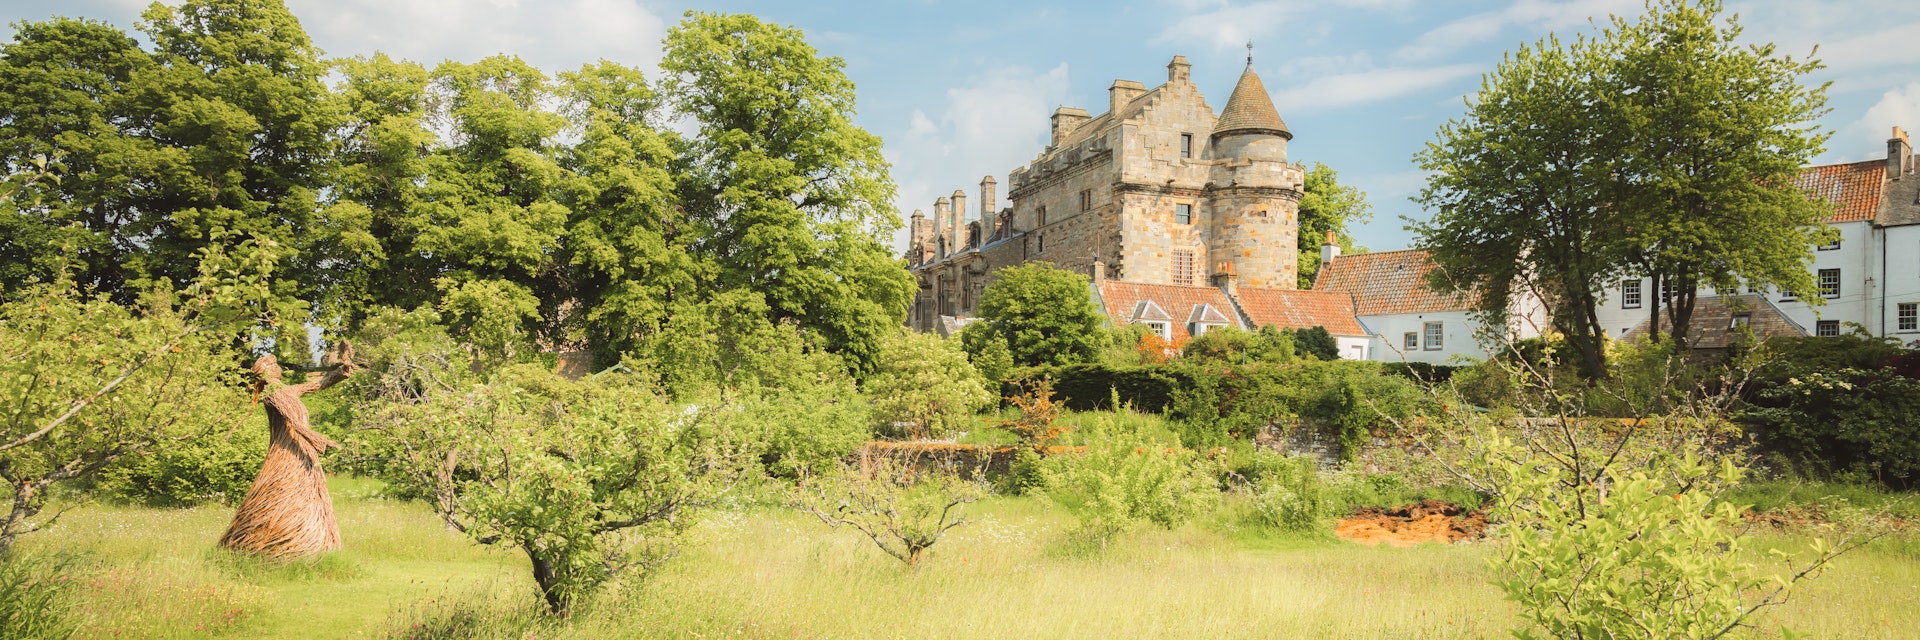 Historic Falkland Palace and village with landscaped gardens on a sunny summer day in Fife, Scotland, UK.
1502567466